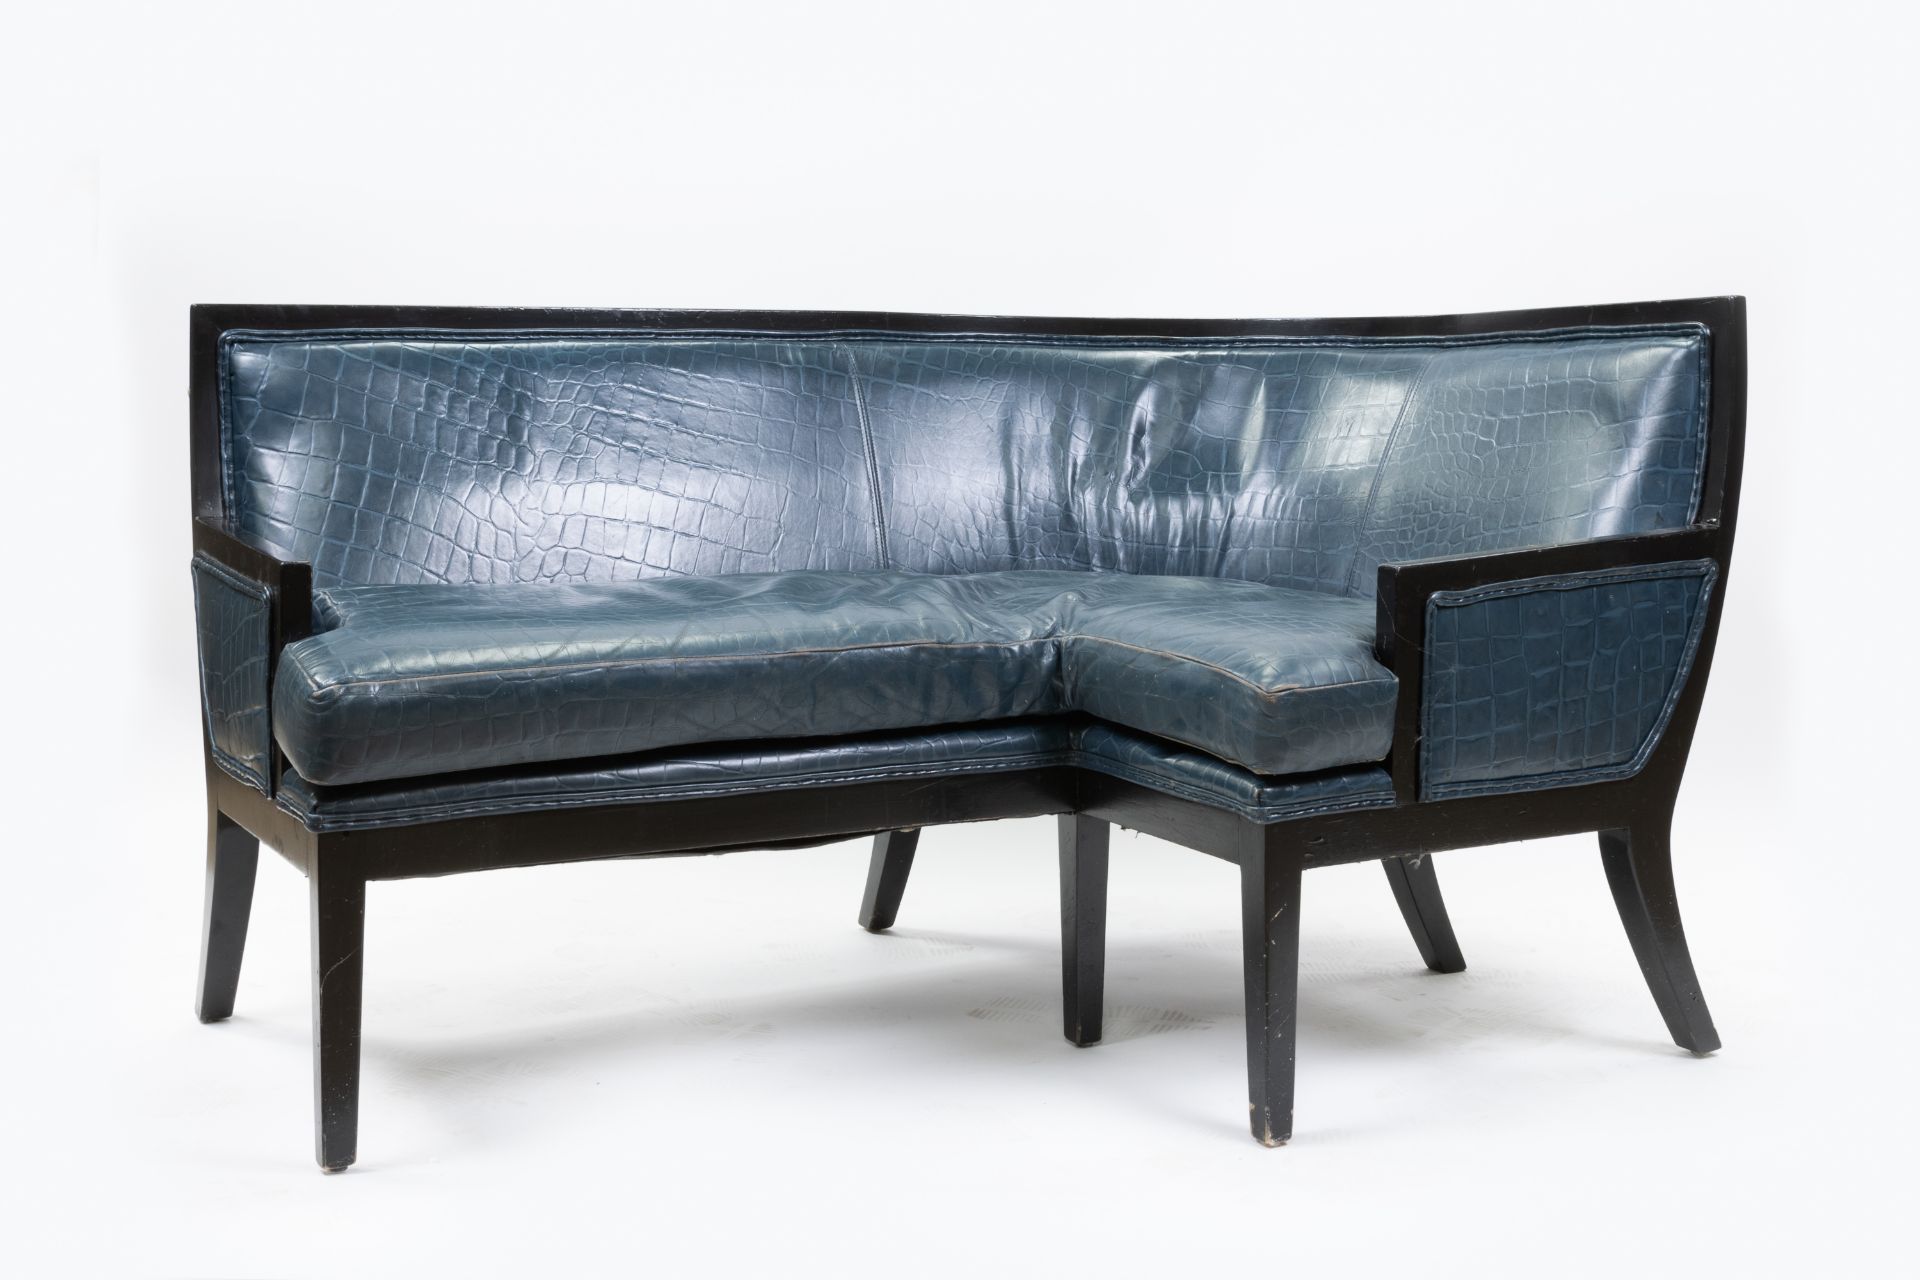 Iconic Berkeley Blue Bar Sofa Commissioned by David Collins - Image 4 of 5